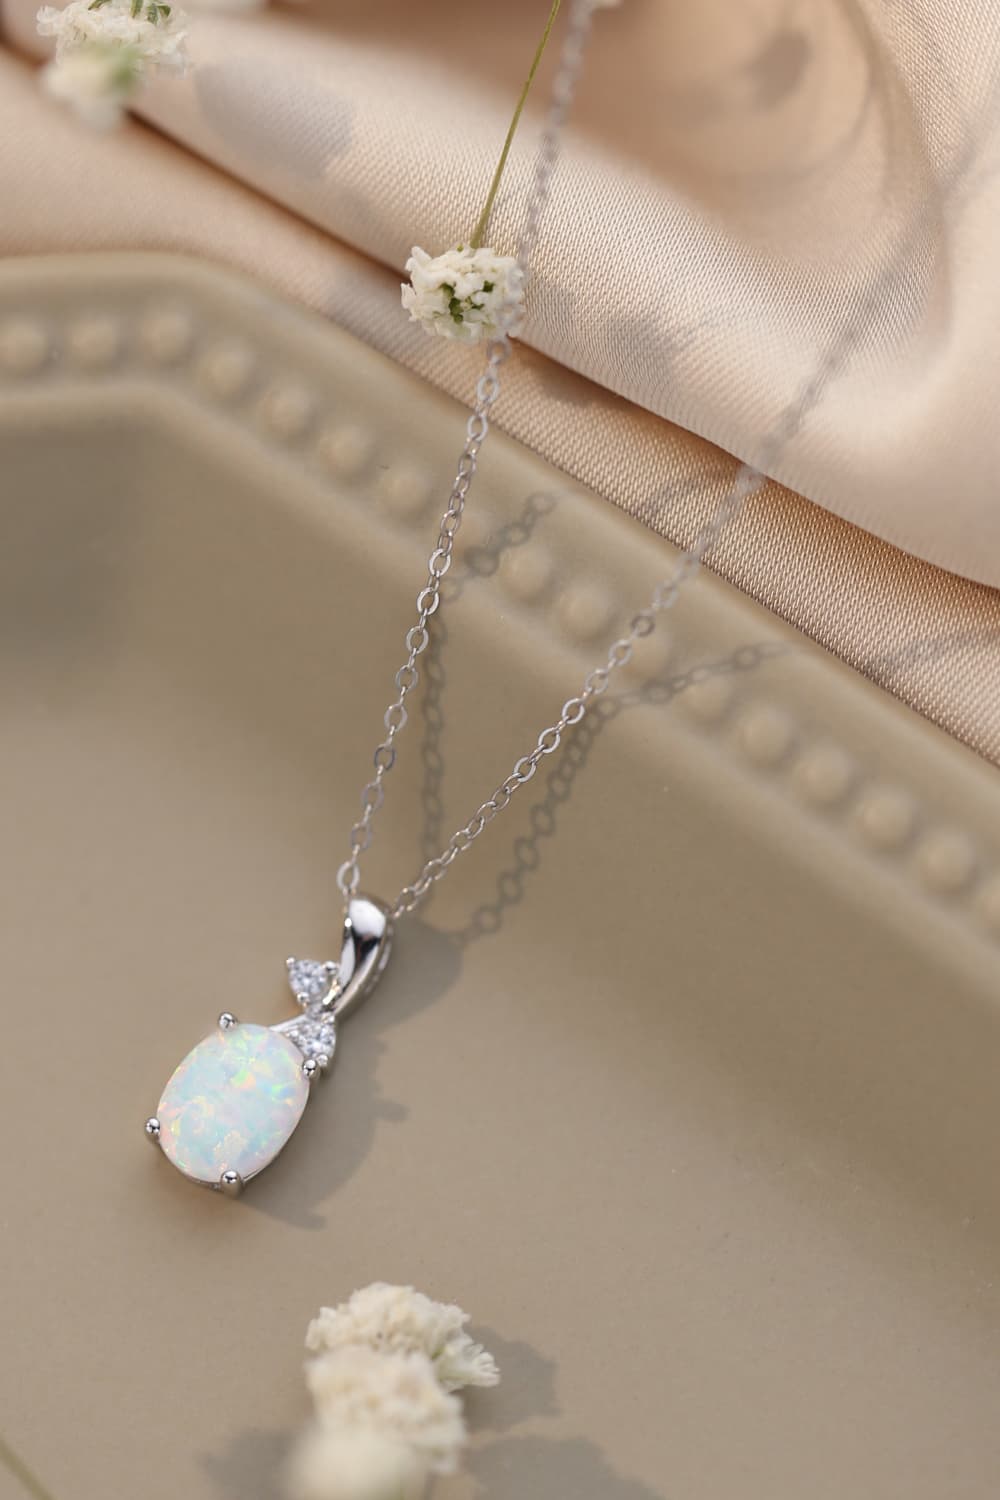 Opal Oval Pendant 925 Sterling Silver Chain Necklace